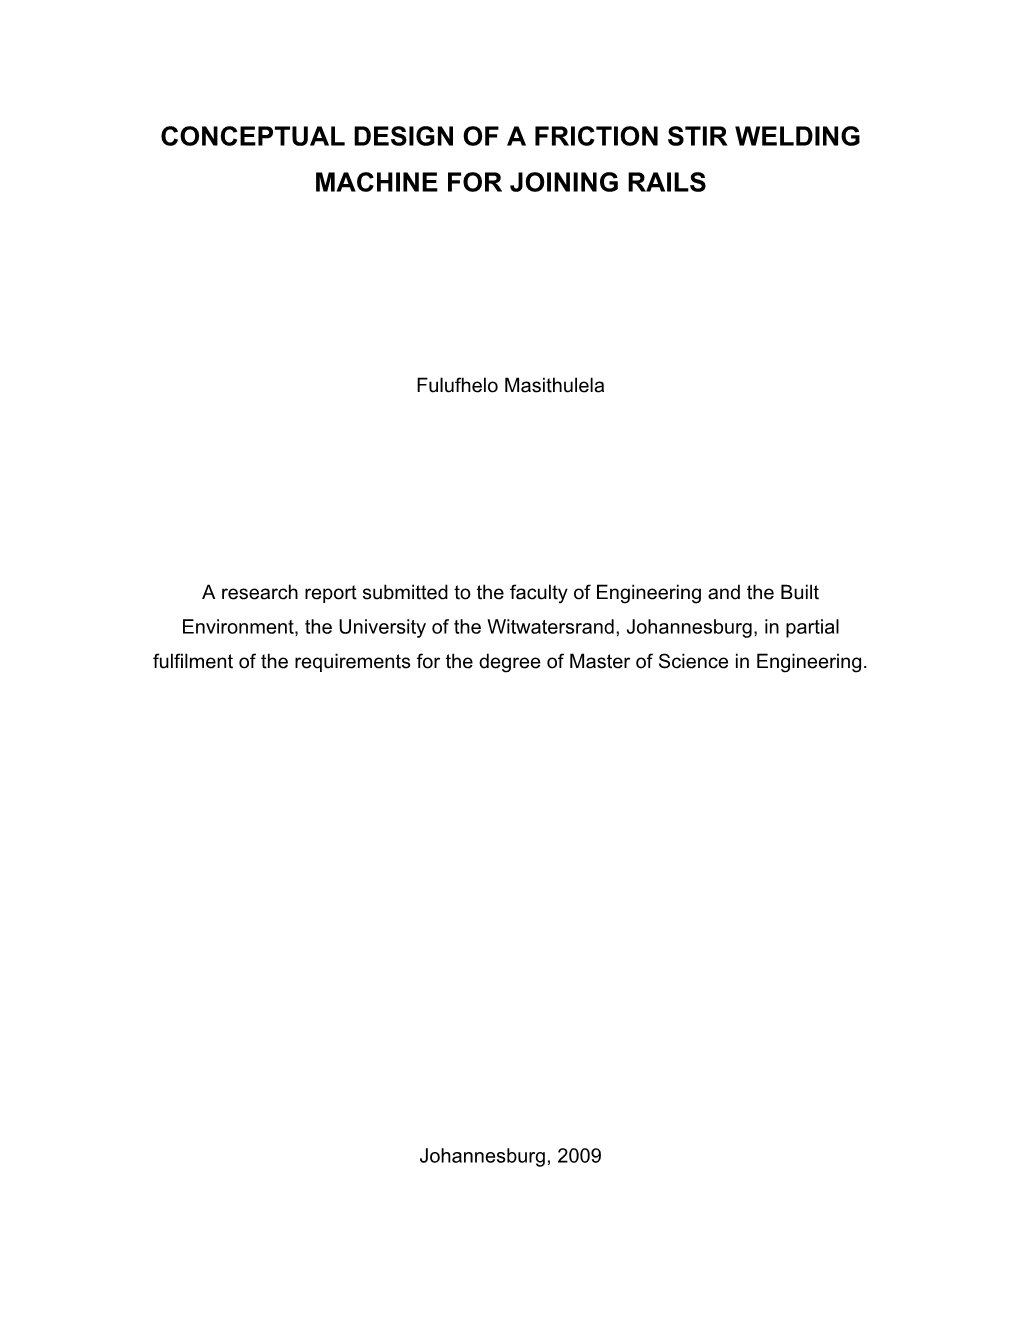 Conceptual Design of a Friction Stir Welding Machine for Joining Rails